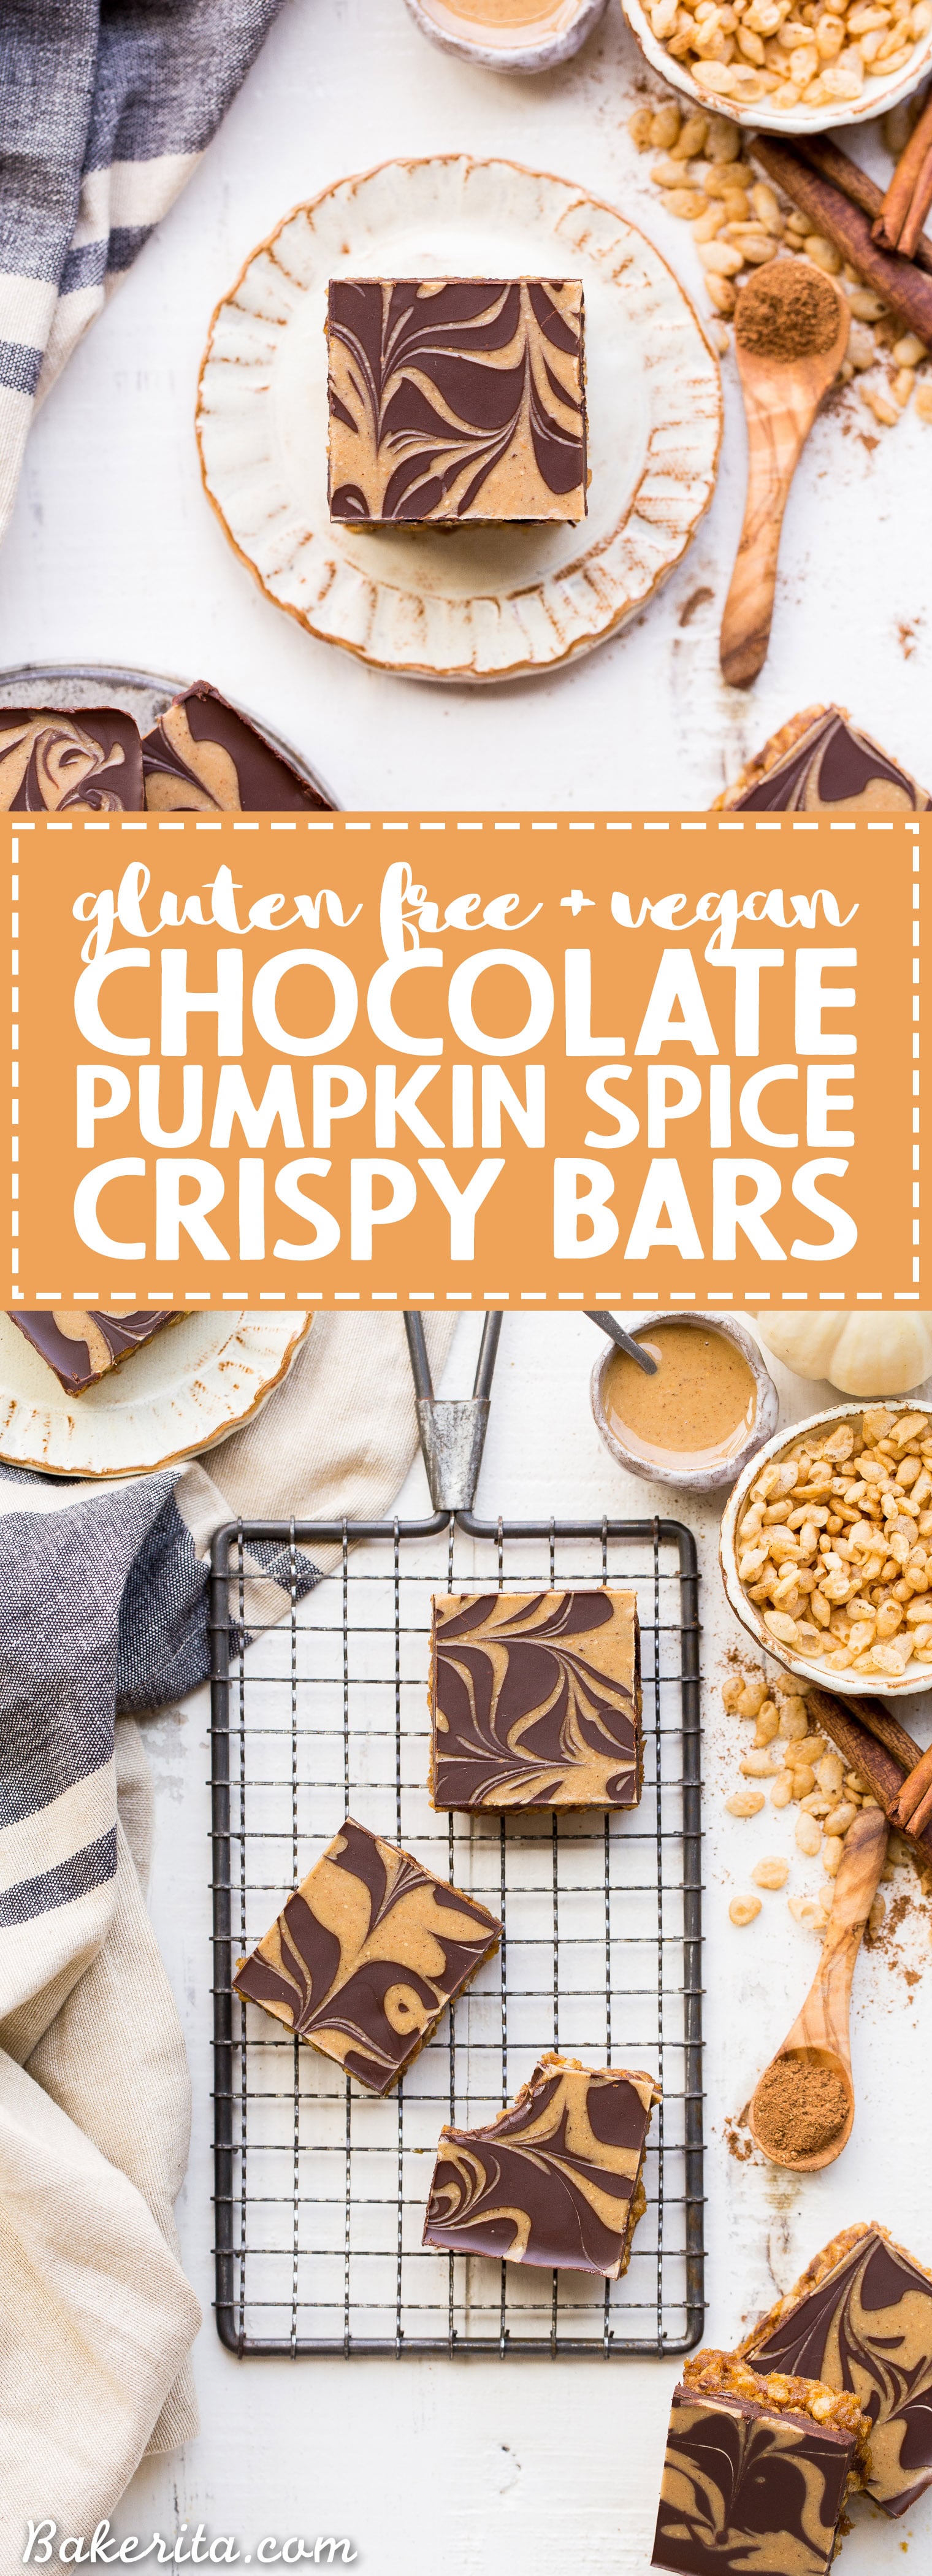 These Chocolate Pumpkin Spice Crispy Bars have a pumpkin spice rice crispy base, topped with a layer of dark chocolate and a pumpkin spice swirl. These bars are easy to make, beautiful, delicious, and gluten-free + vegan!